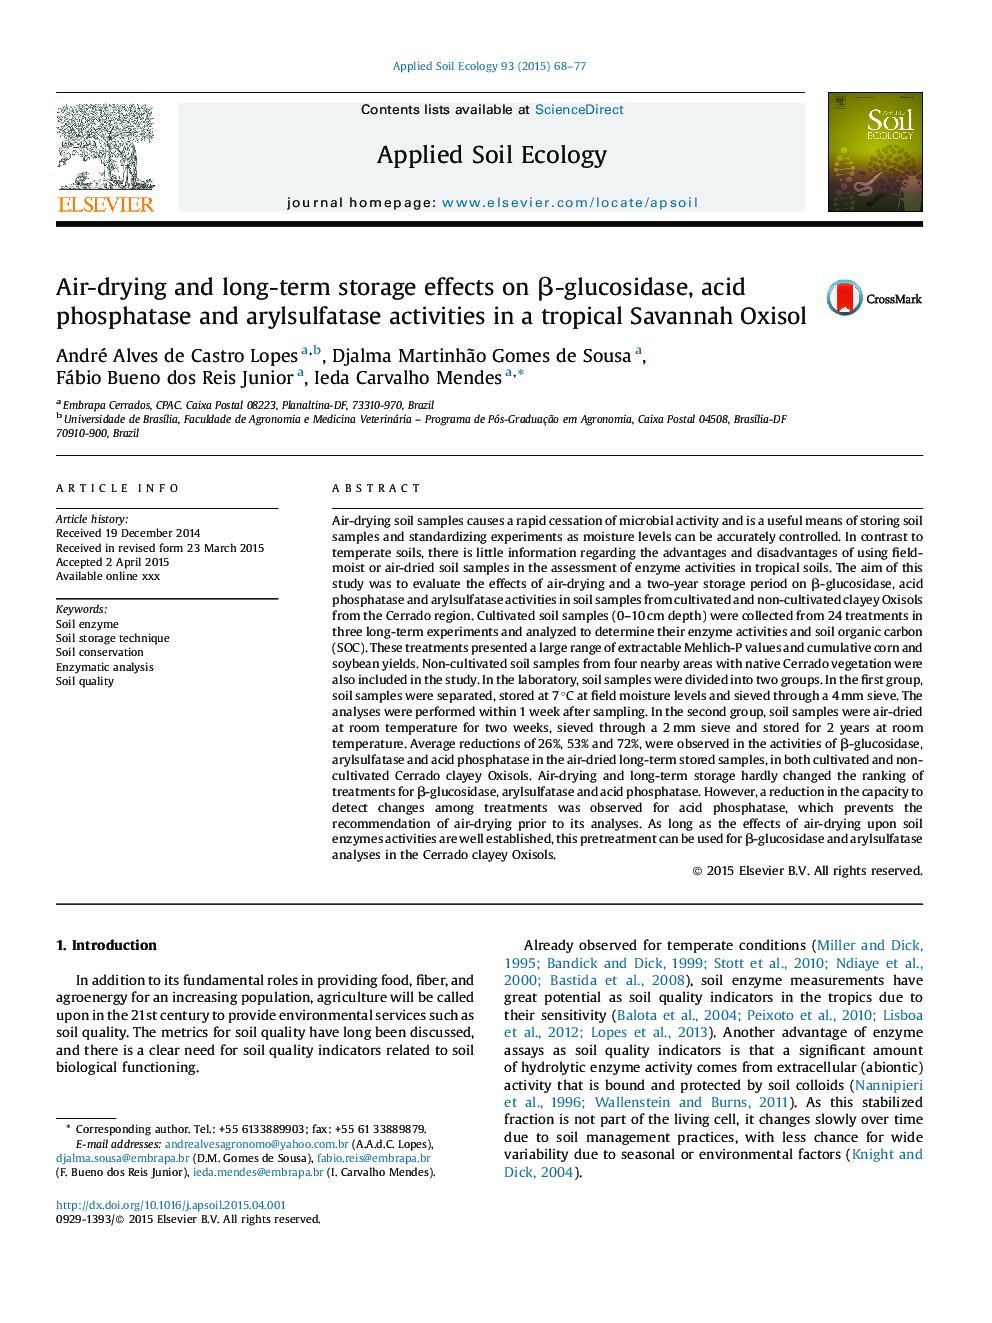 Air-drying and long-term storage effects on Î²-glucosidase, acid phosphatase and arylsulfatase activities in a tropical Savannah Oxisol